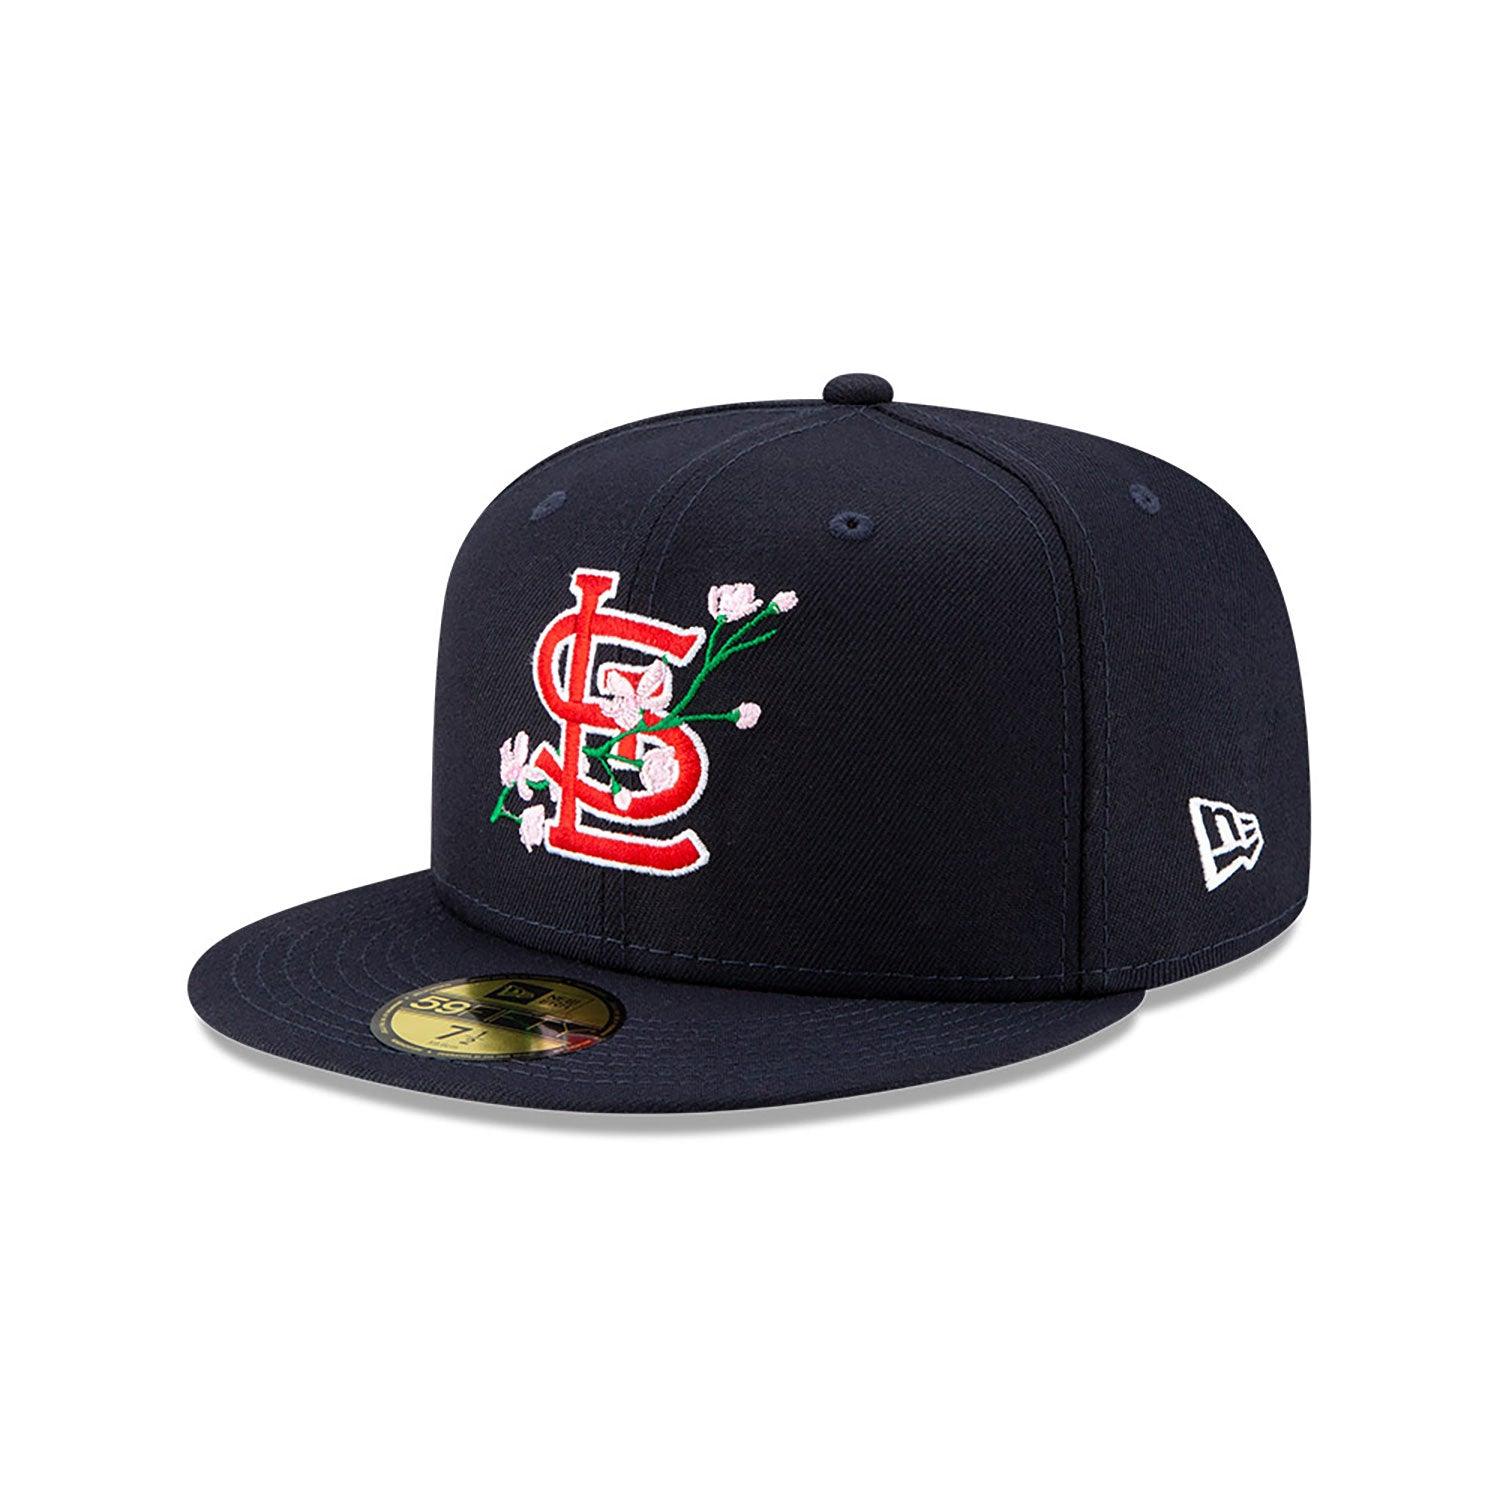 NEW ERA 59FIFTY MLB SAINT LOUIS CARDINALS SIDE PATCH BLOOM NAVY / PINK UV FITTED CAP - FAM